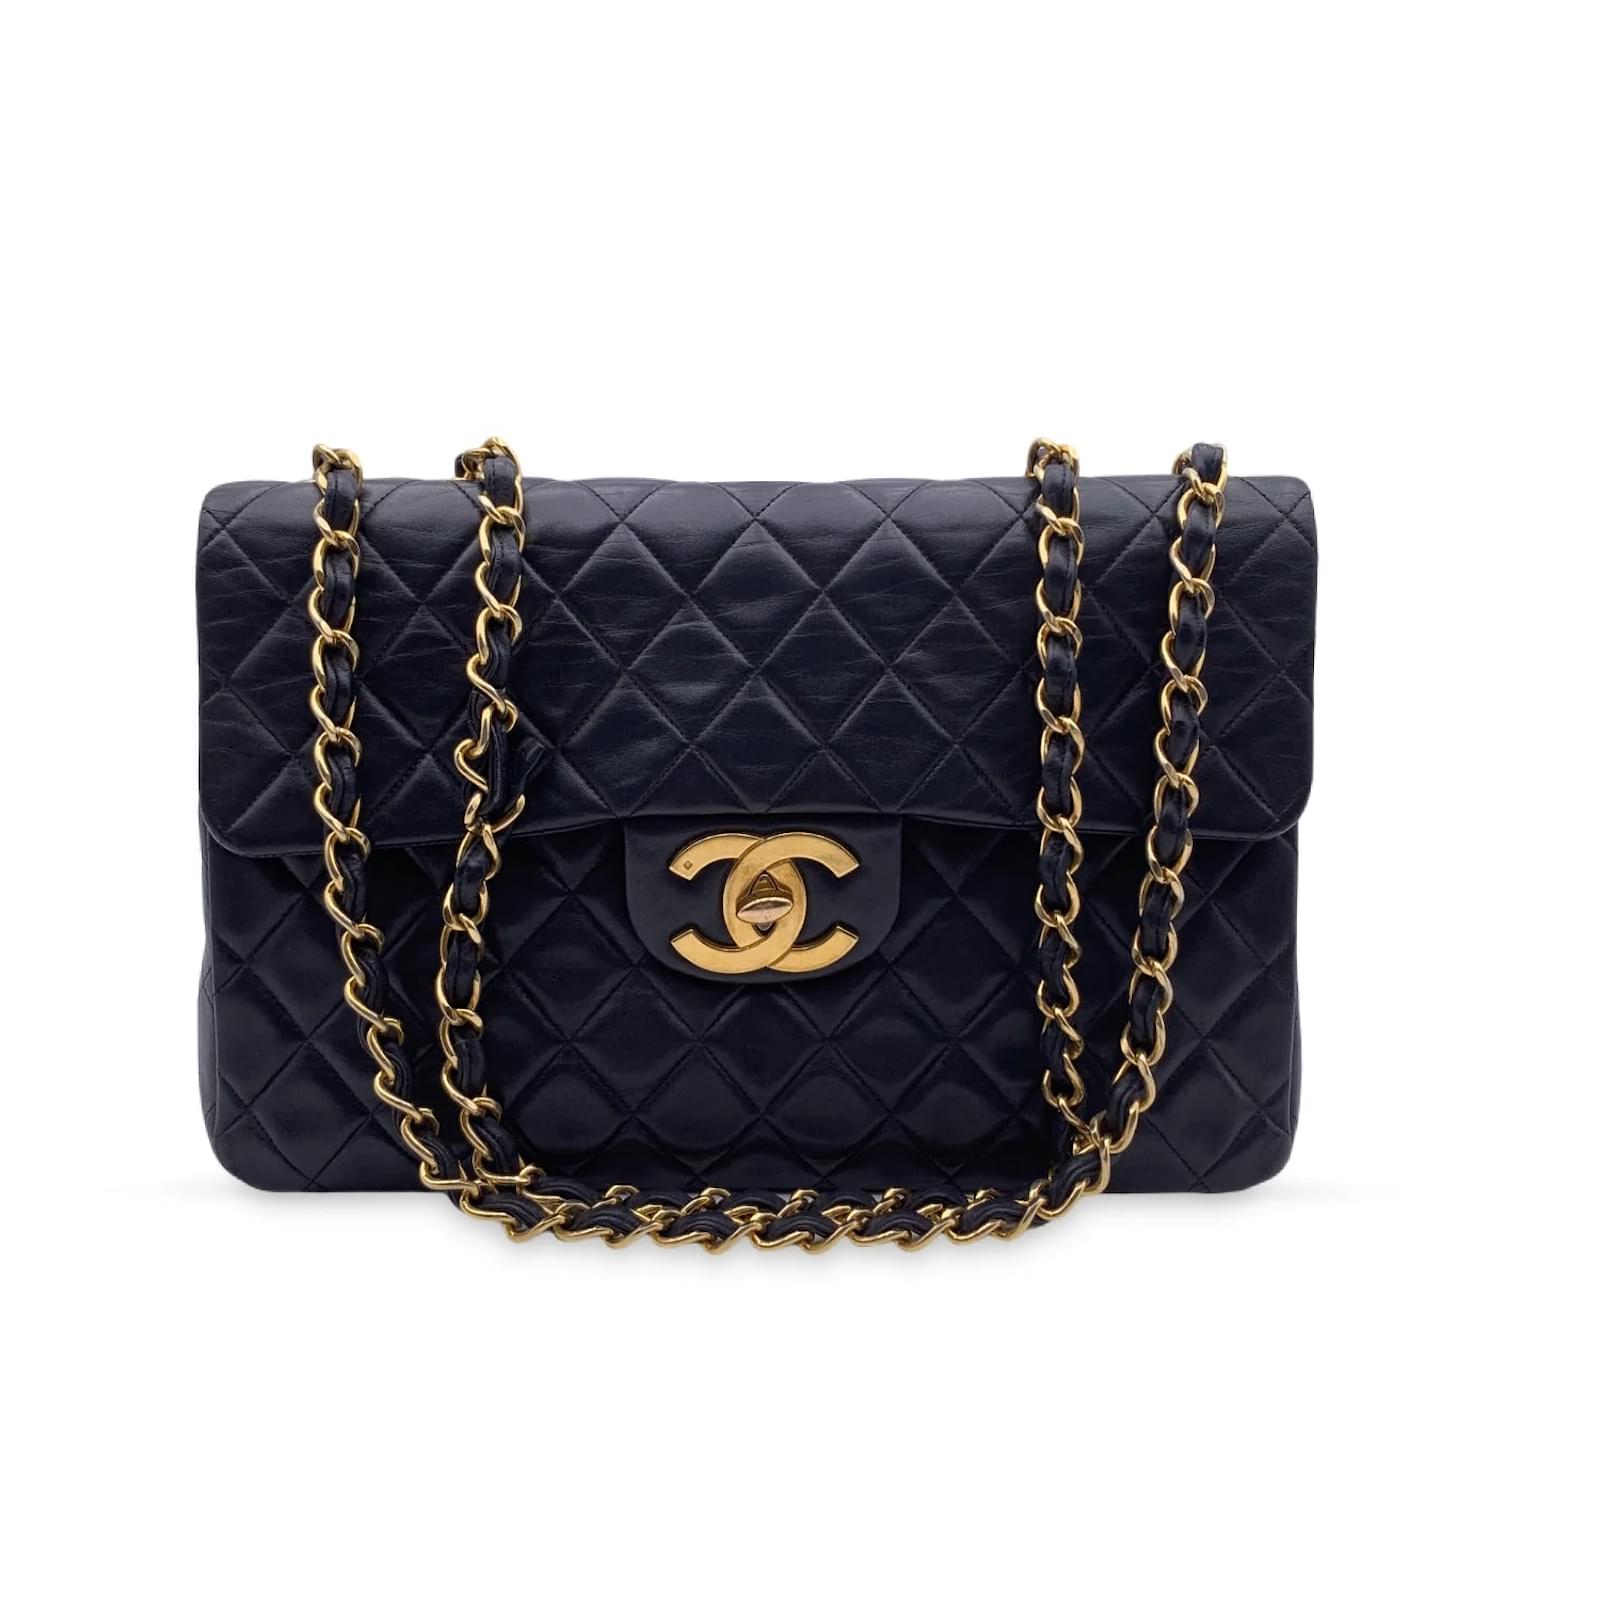 Chanel 2.55 Bag: How Much it Costs And Where To Buy It